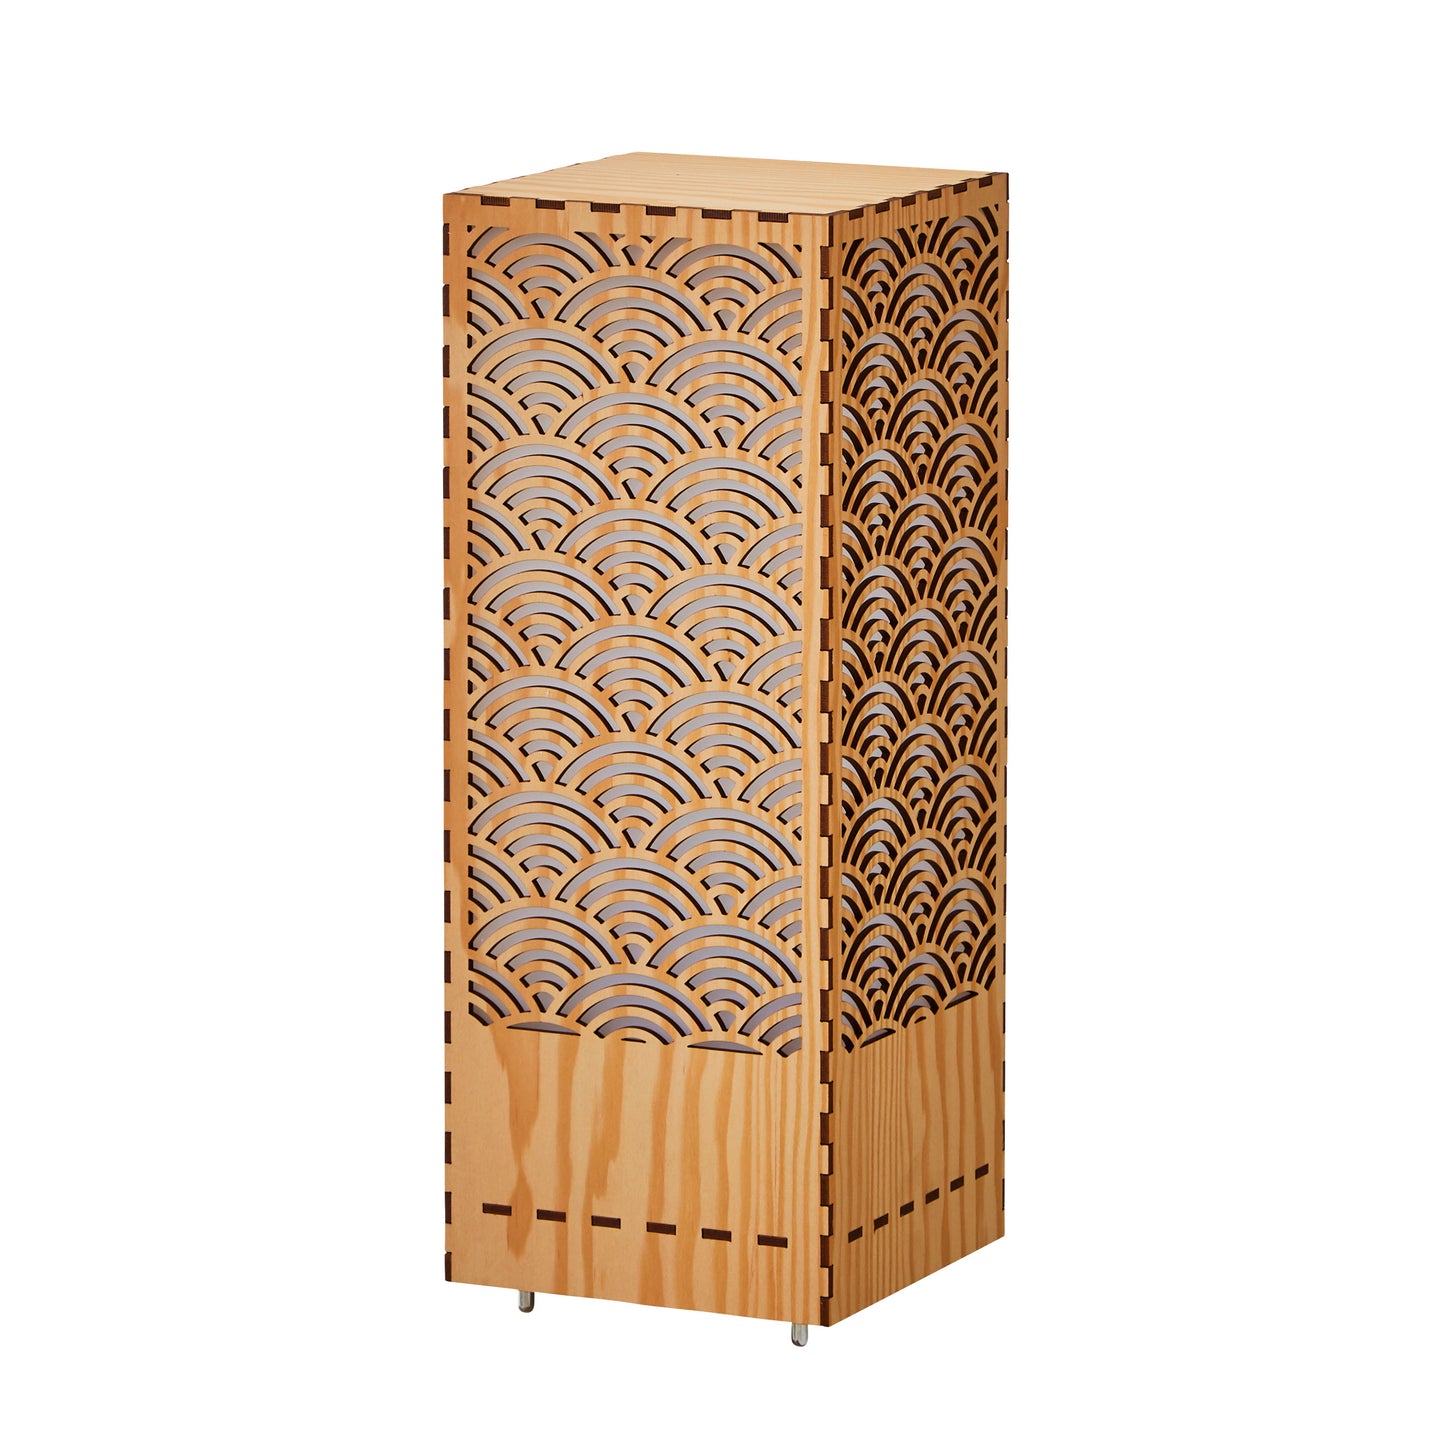 Japanese Room Lantern Harmonious decorative light with Japanese traditional Seigaiha pattern for bedroom, living room and Japanese-style room.